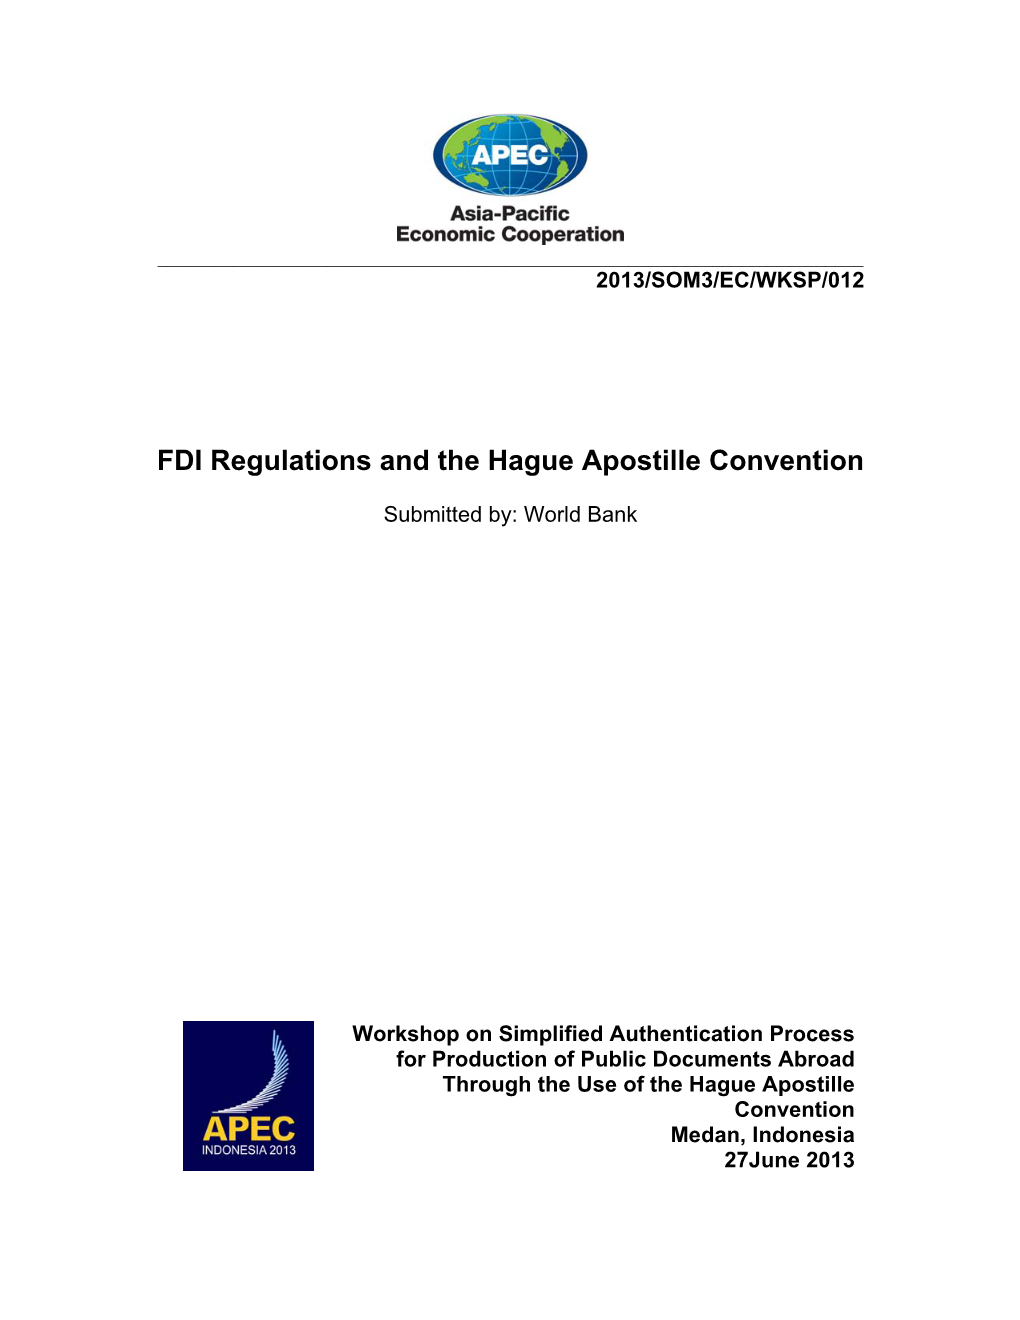 FDI Regulations and the Hague Apostille Convention